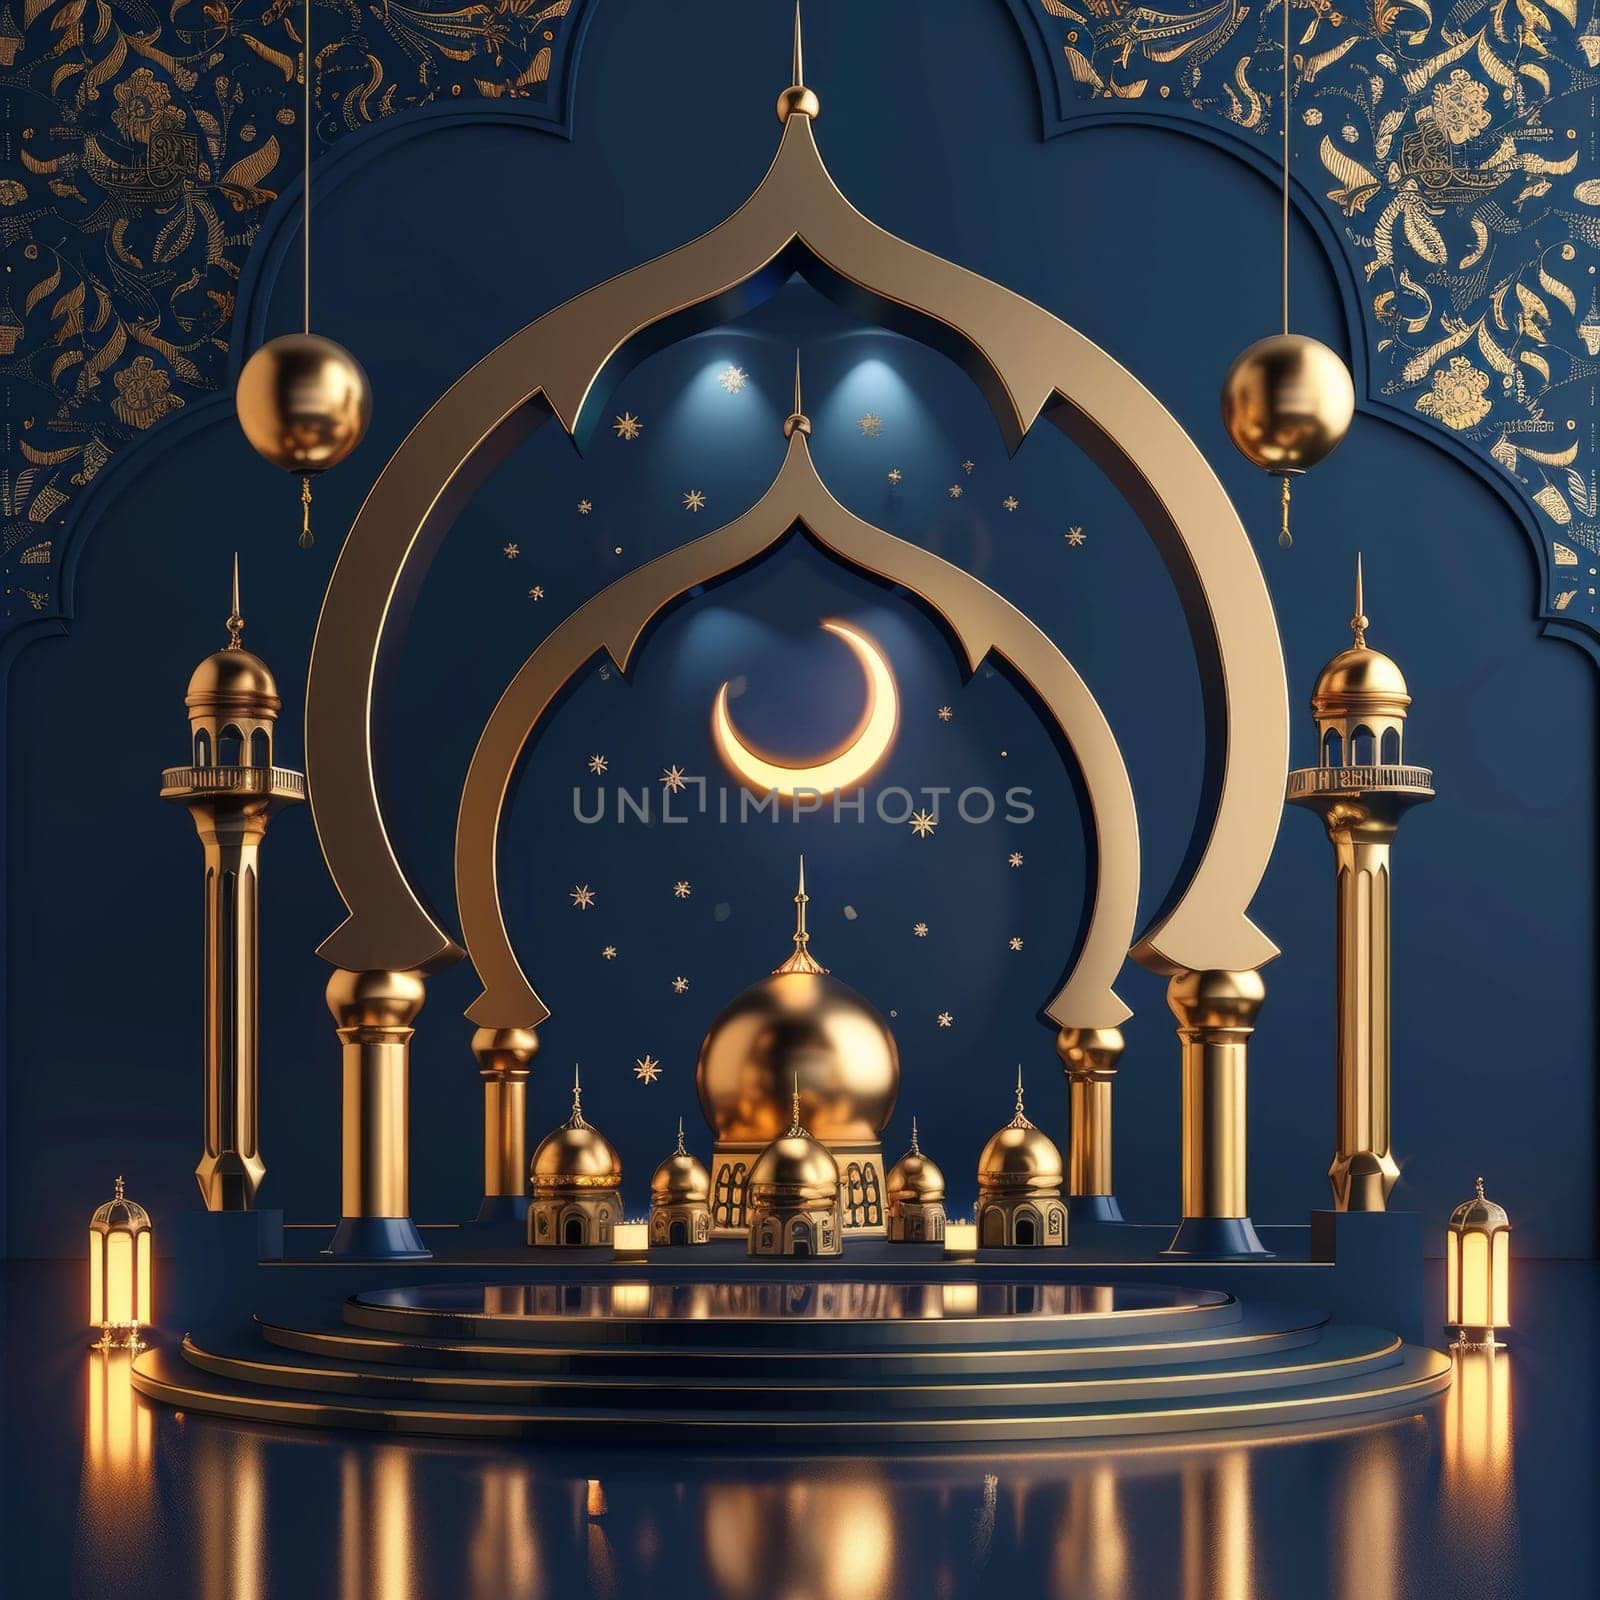 Artistic depiction of an ornate mosque with a golden arch framing a crescent moon and stars. by sfinks